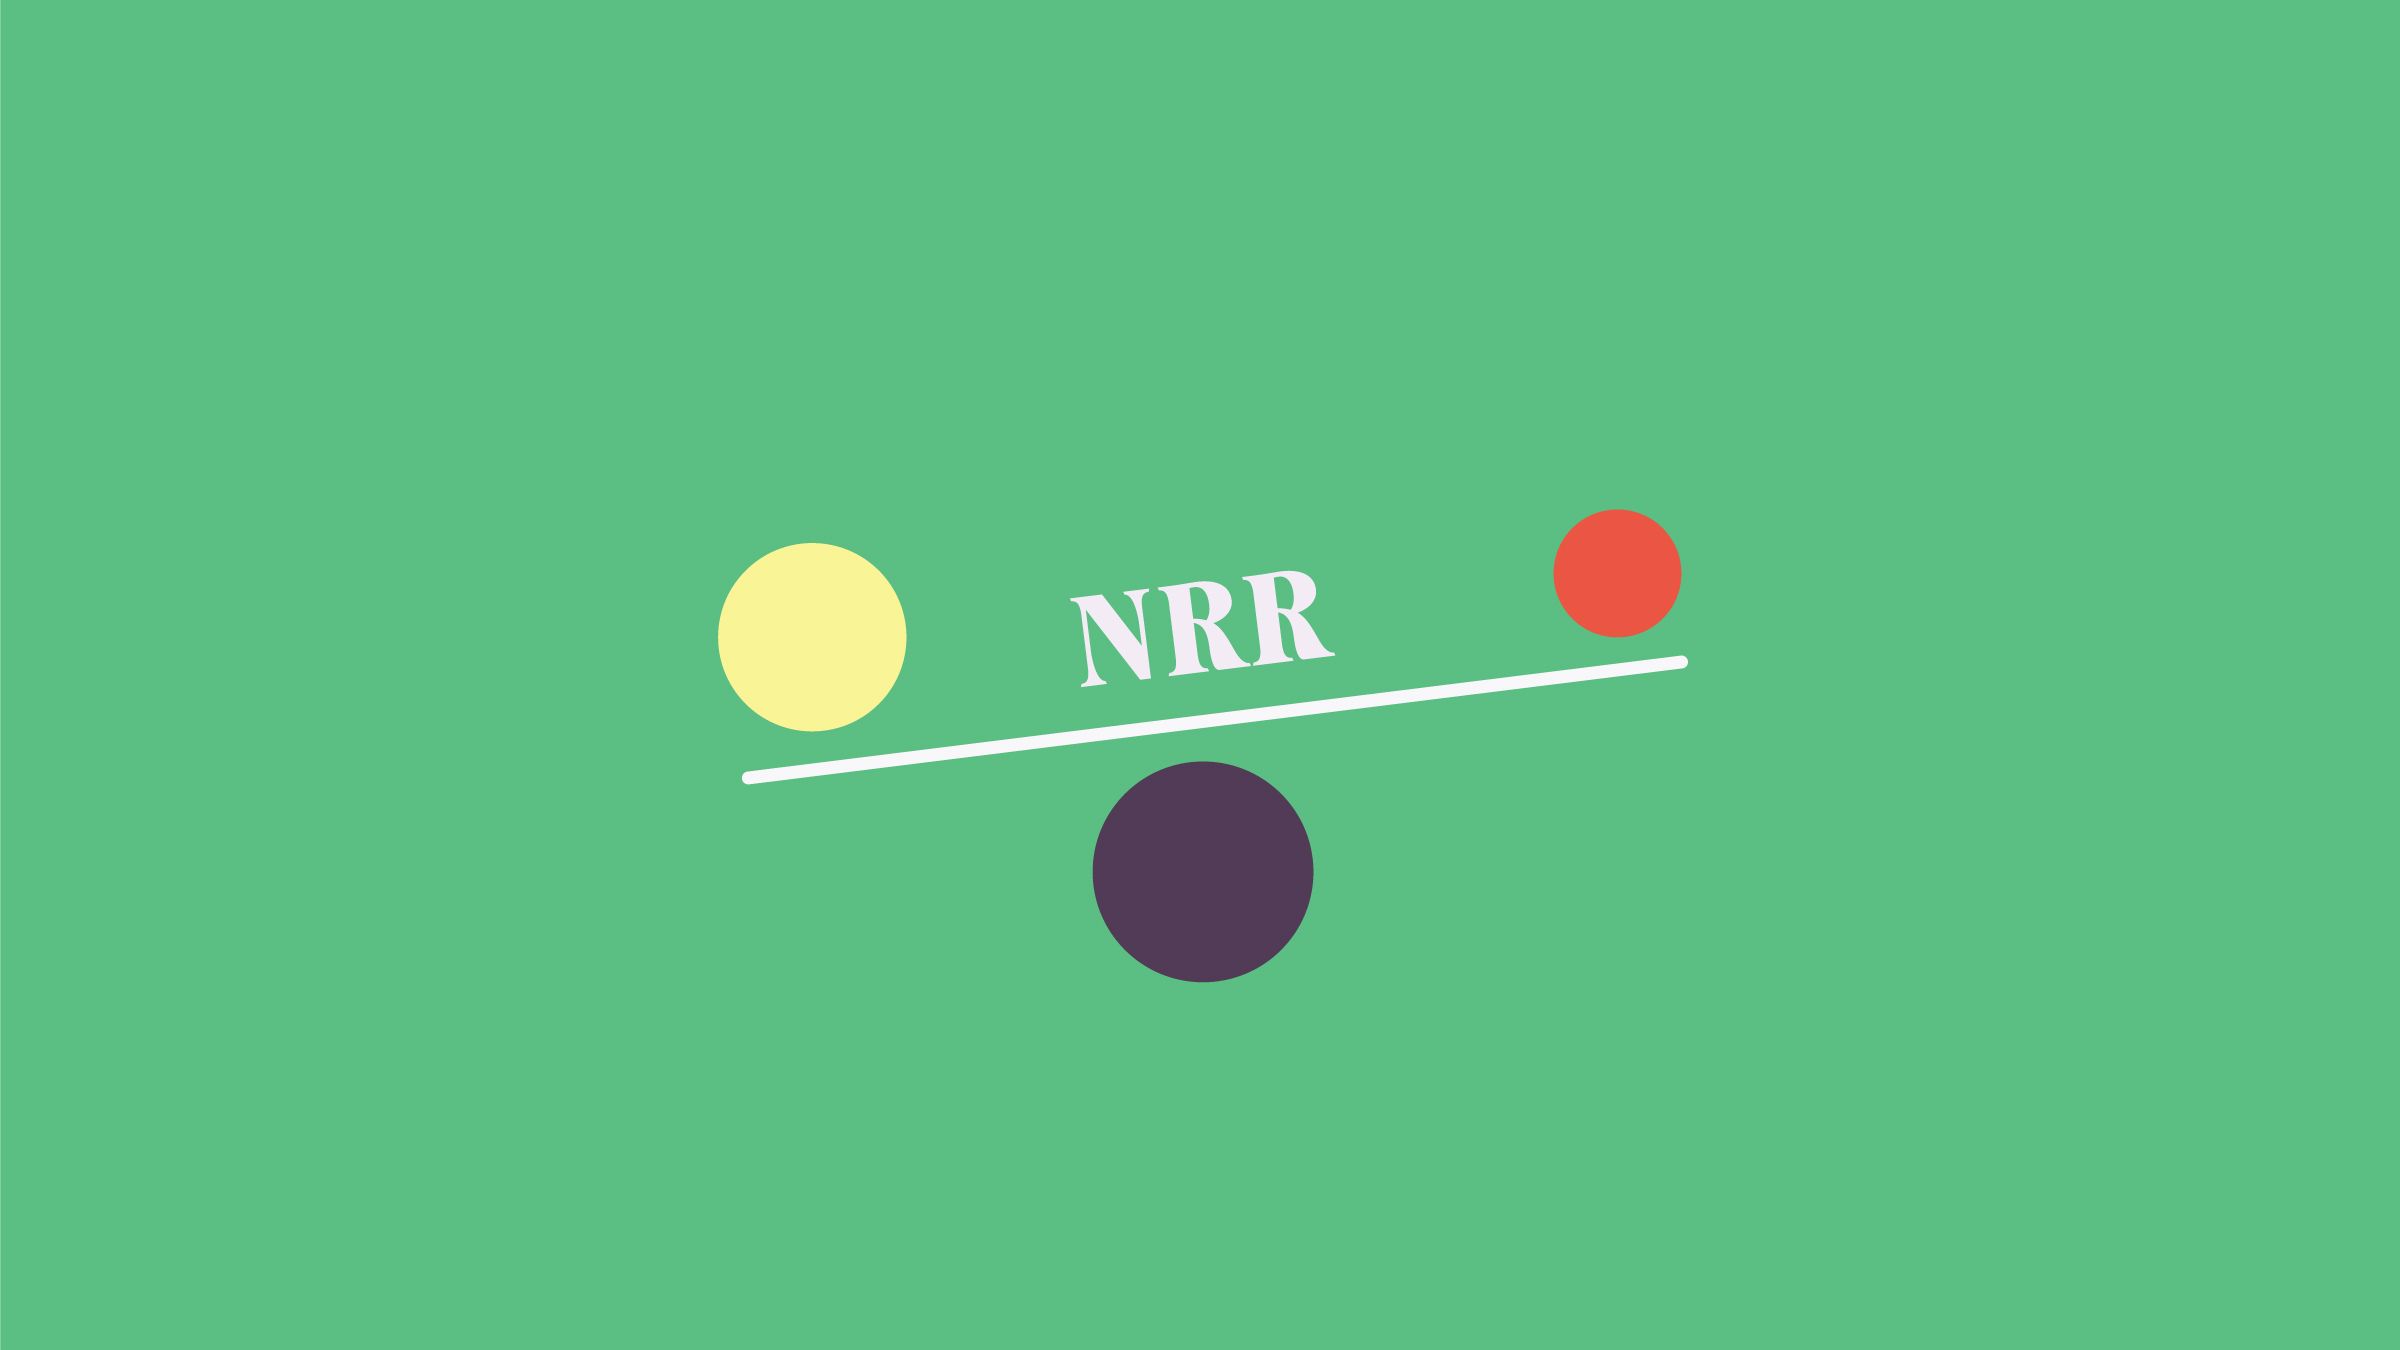 Yellow and red circles balancing on a line supported by a black circle, with the word "NRR" in the middle of the line